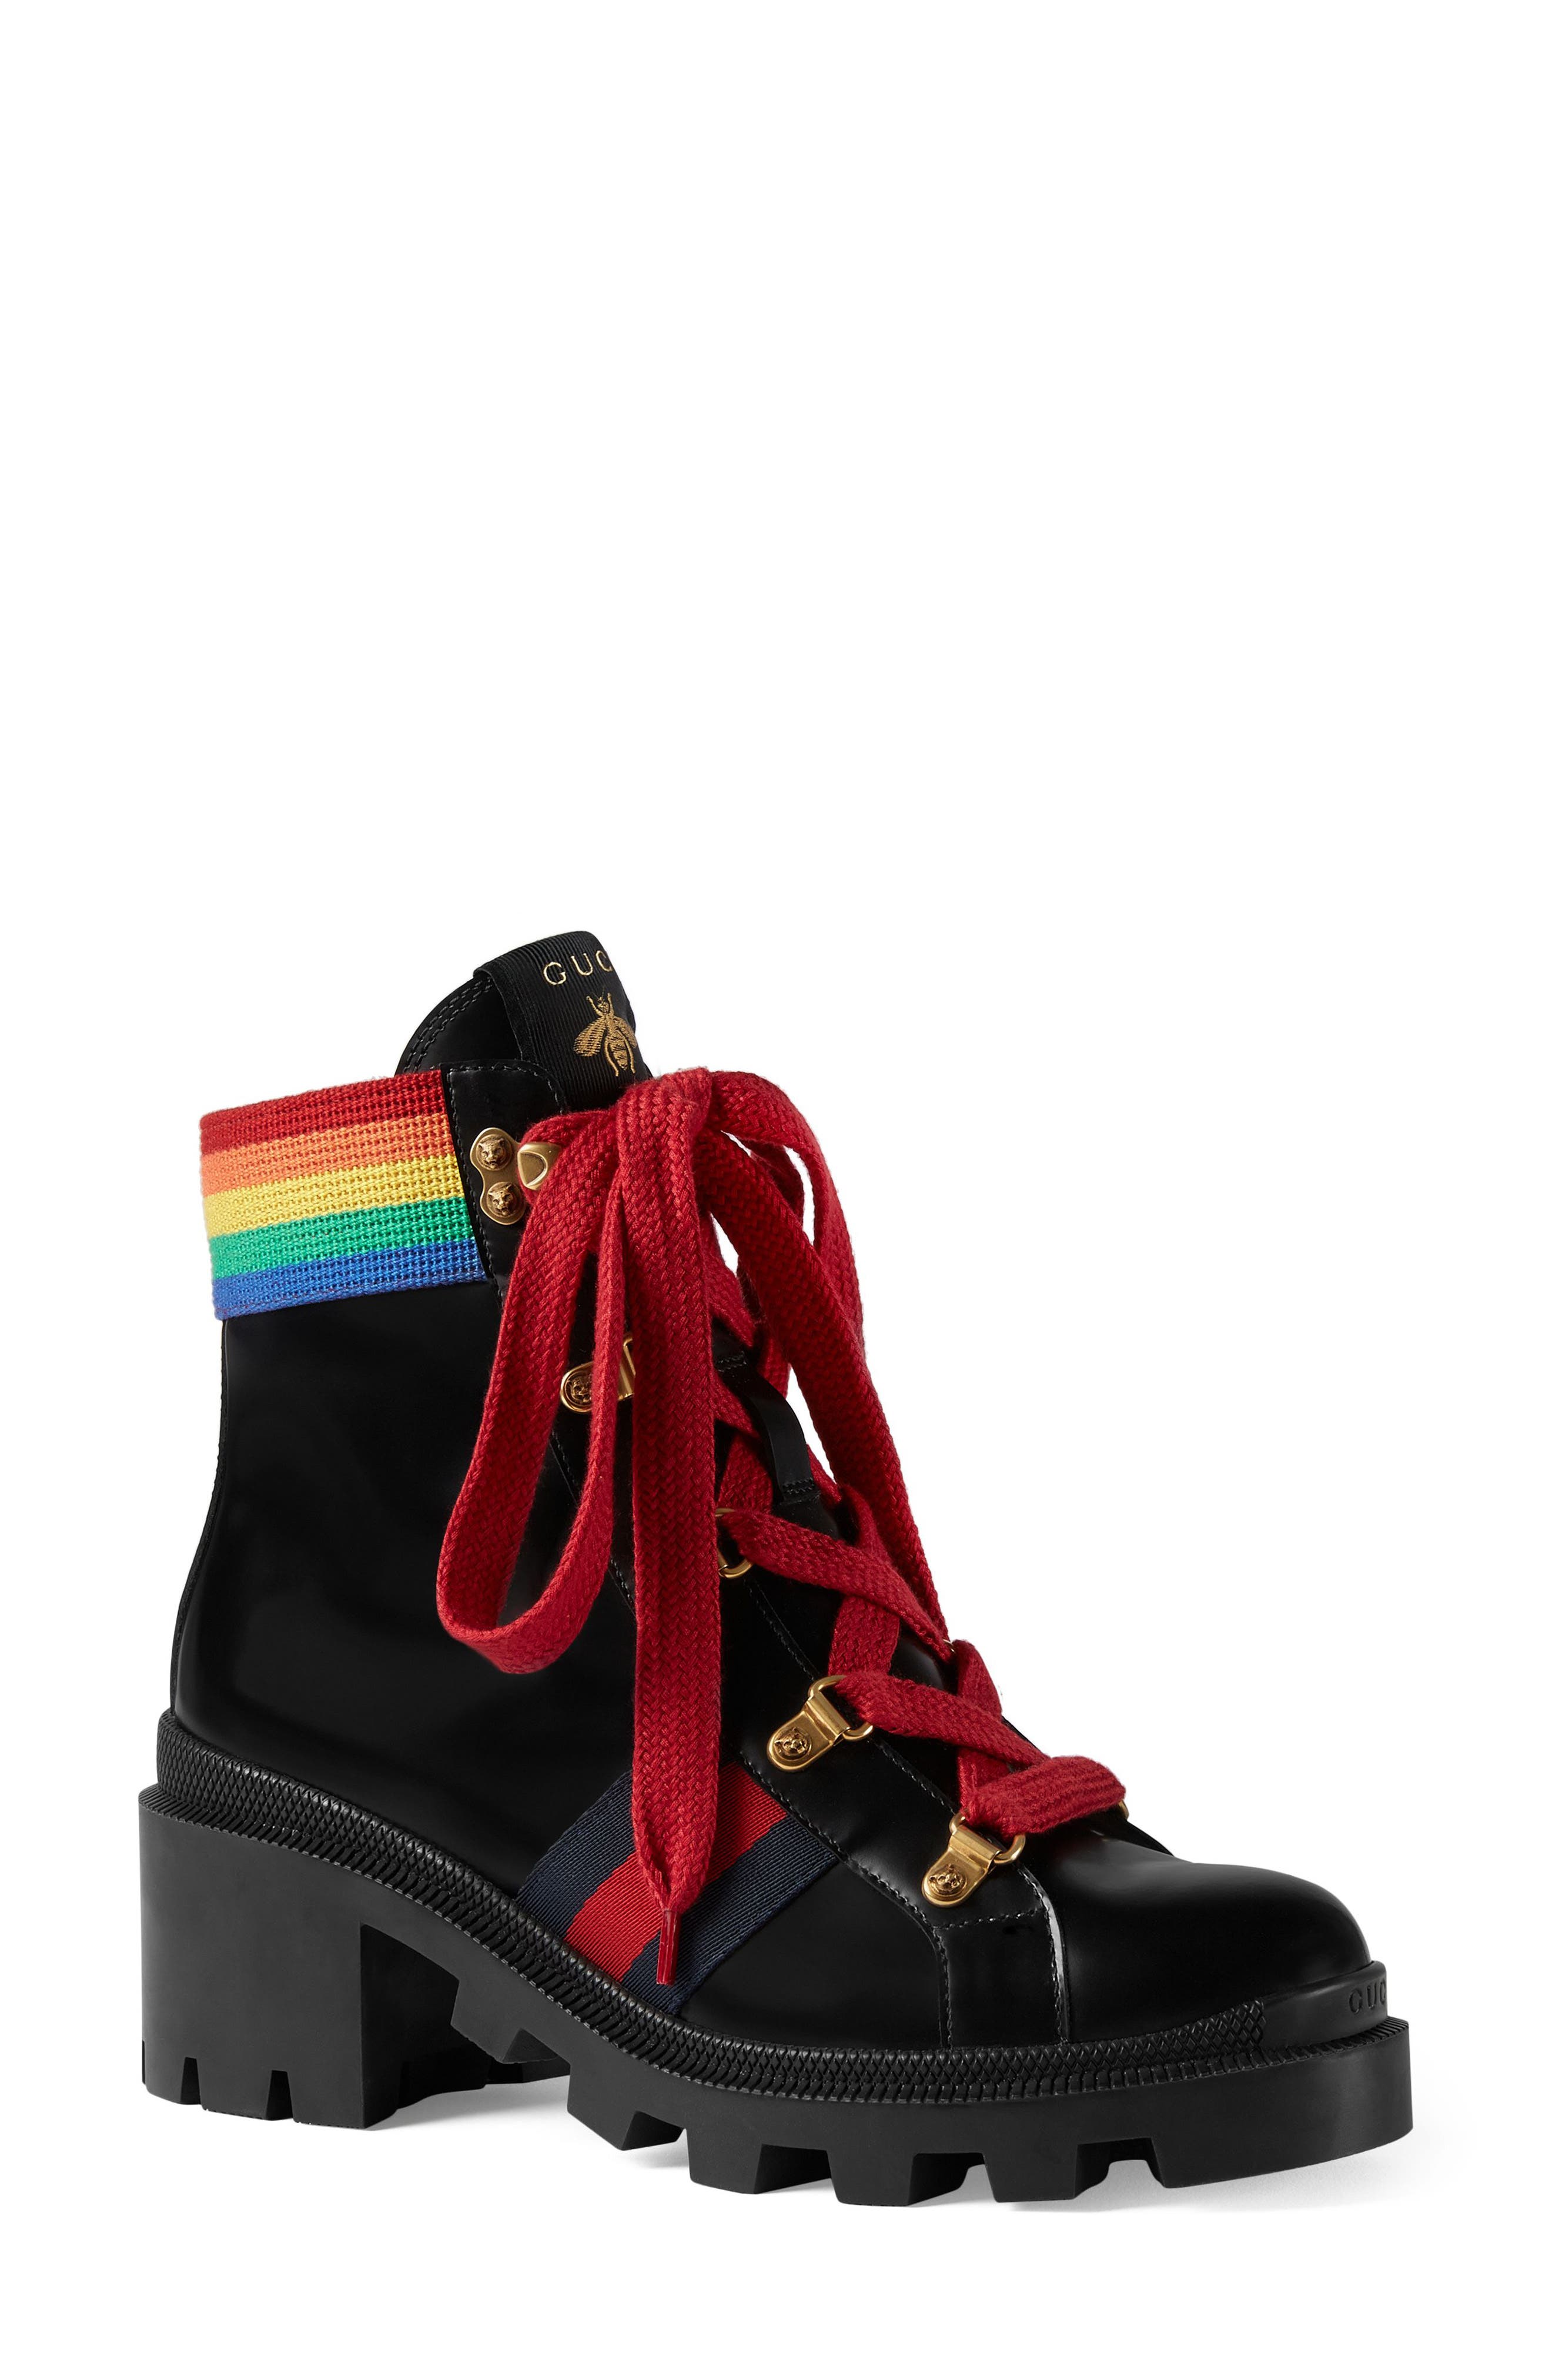 gucci inspired combat boots